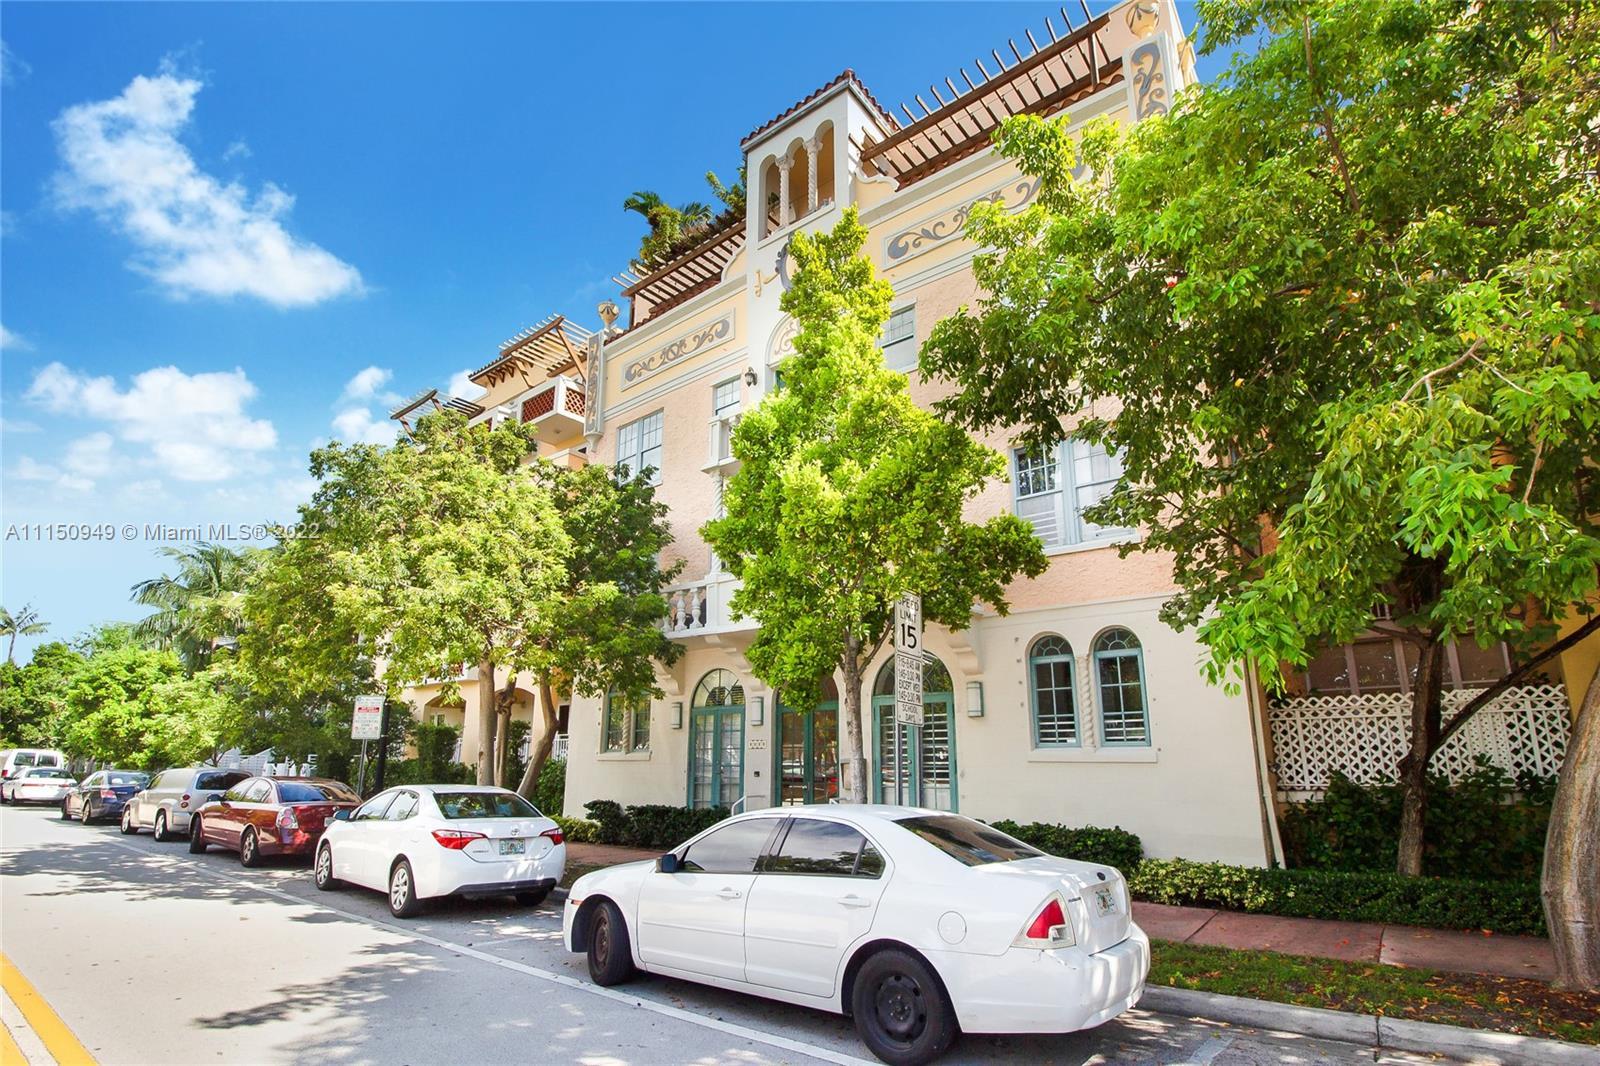 Exclusive 28-unit boutique building, in the heart of sought-after South of Fifth neighborhood with l